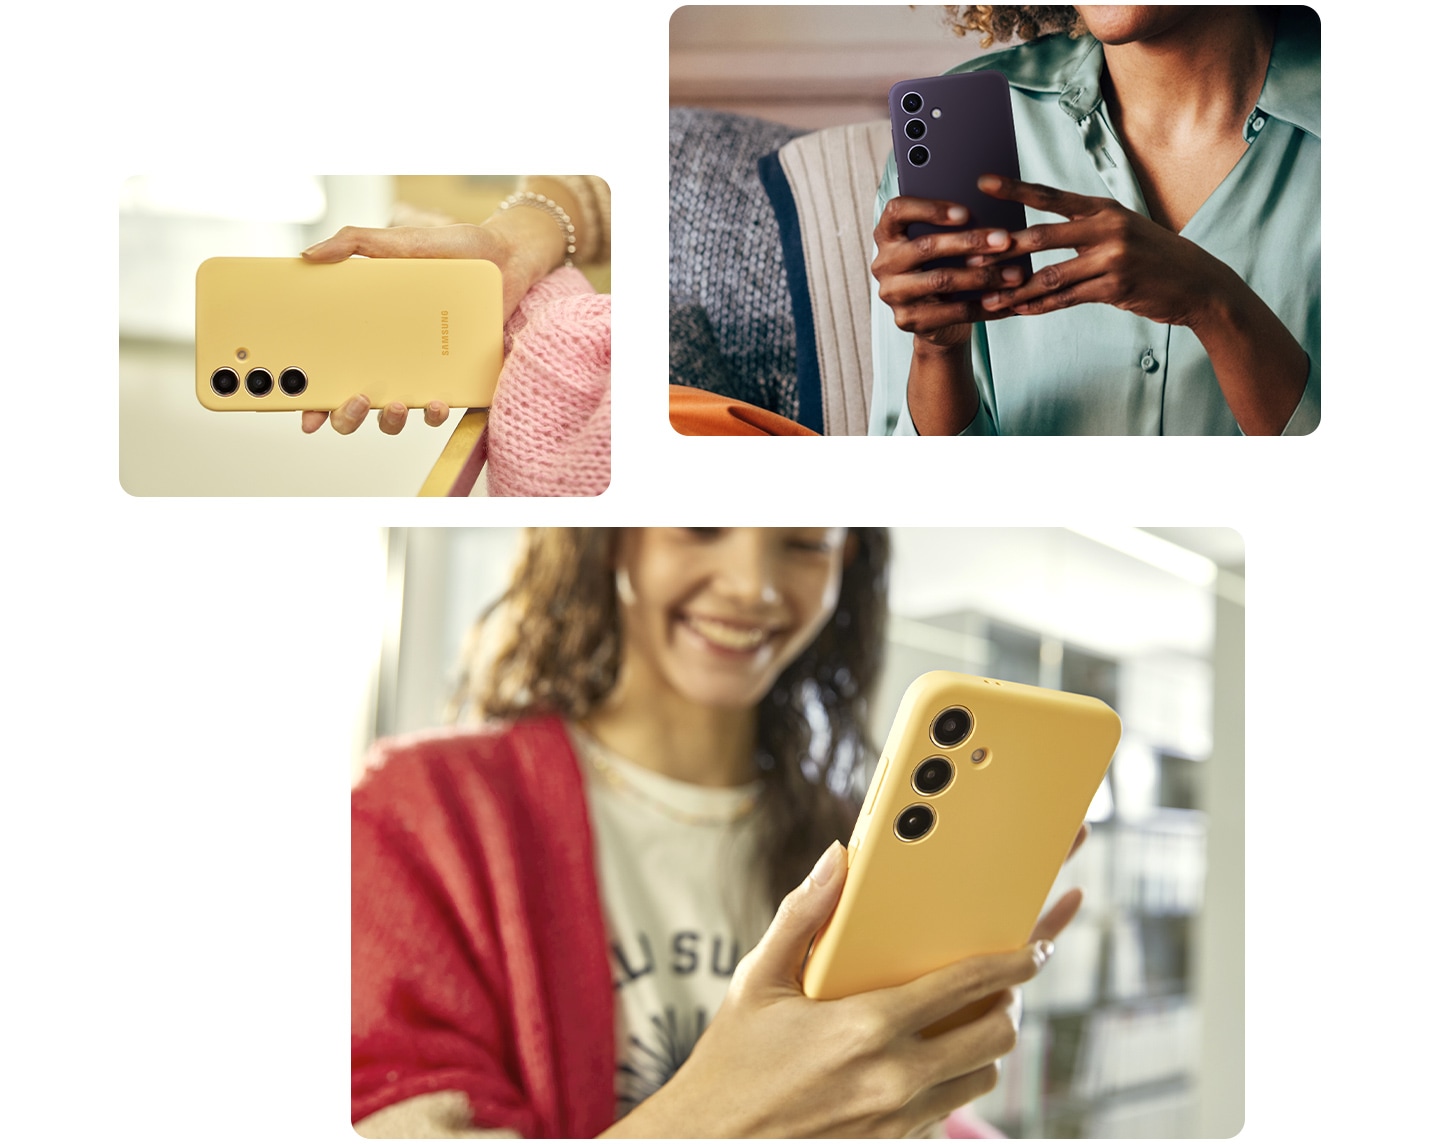 On the top left, a woman is comfortably holding the Galaxy S24 in a violet Silicone case. Below, two different shots show a person holding a Galaxy S24 Plus in a yellow Silicone case with one hand, showing the ease of its grip.